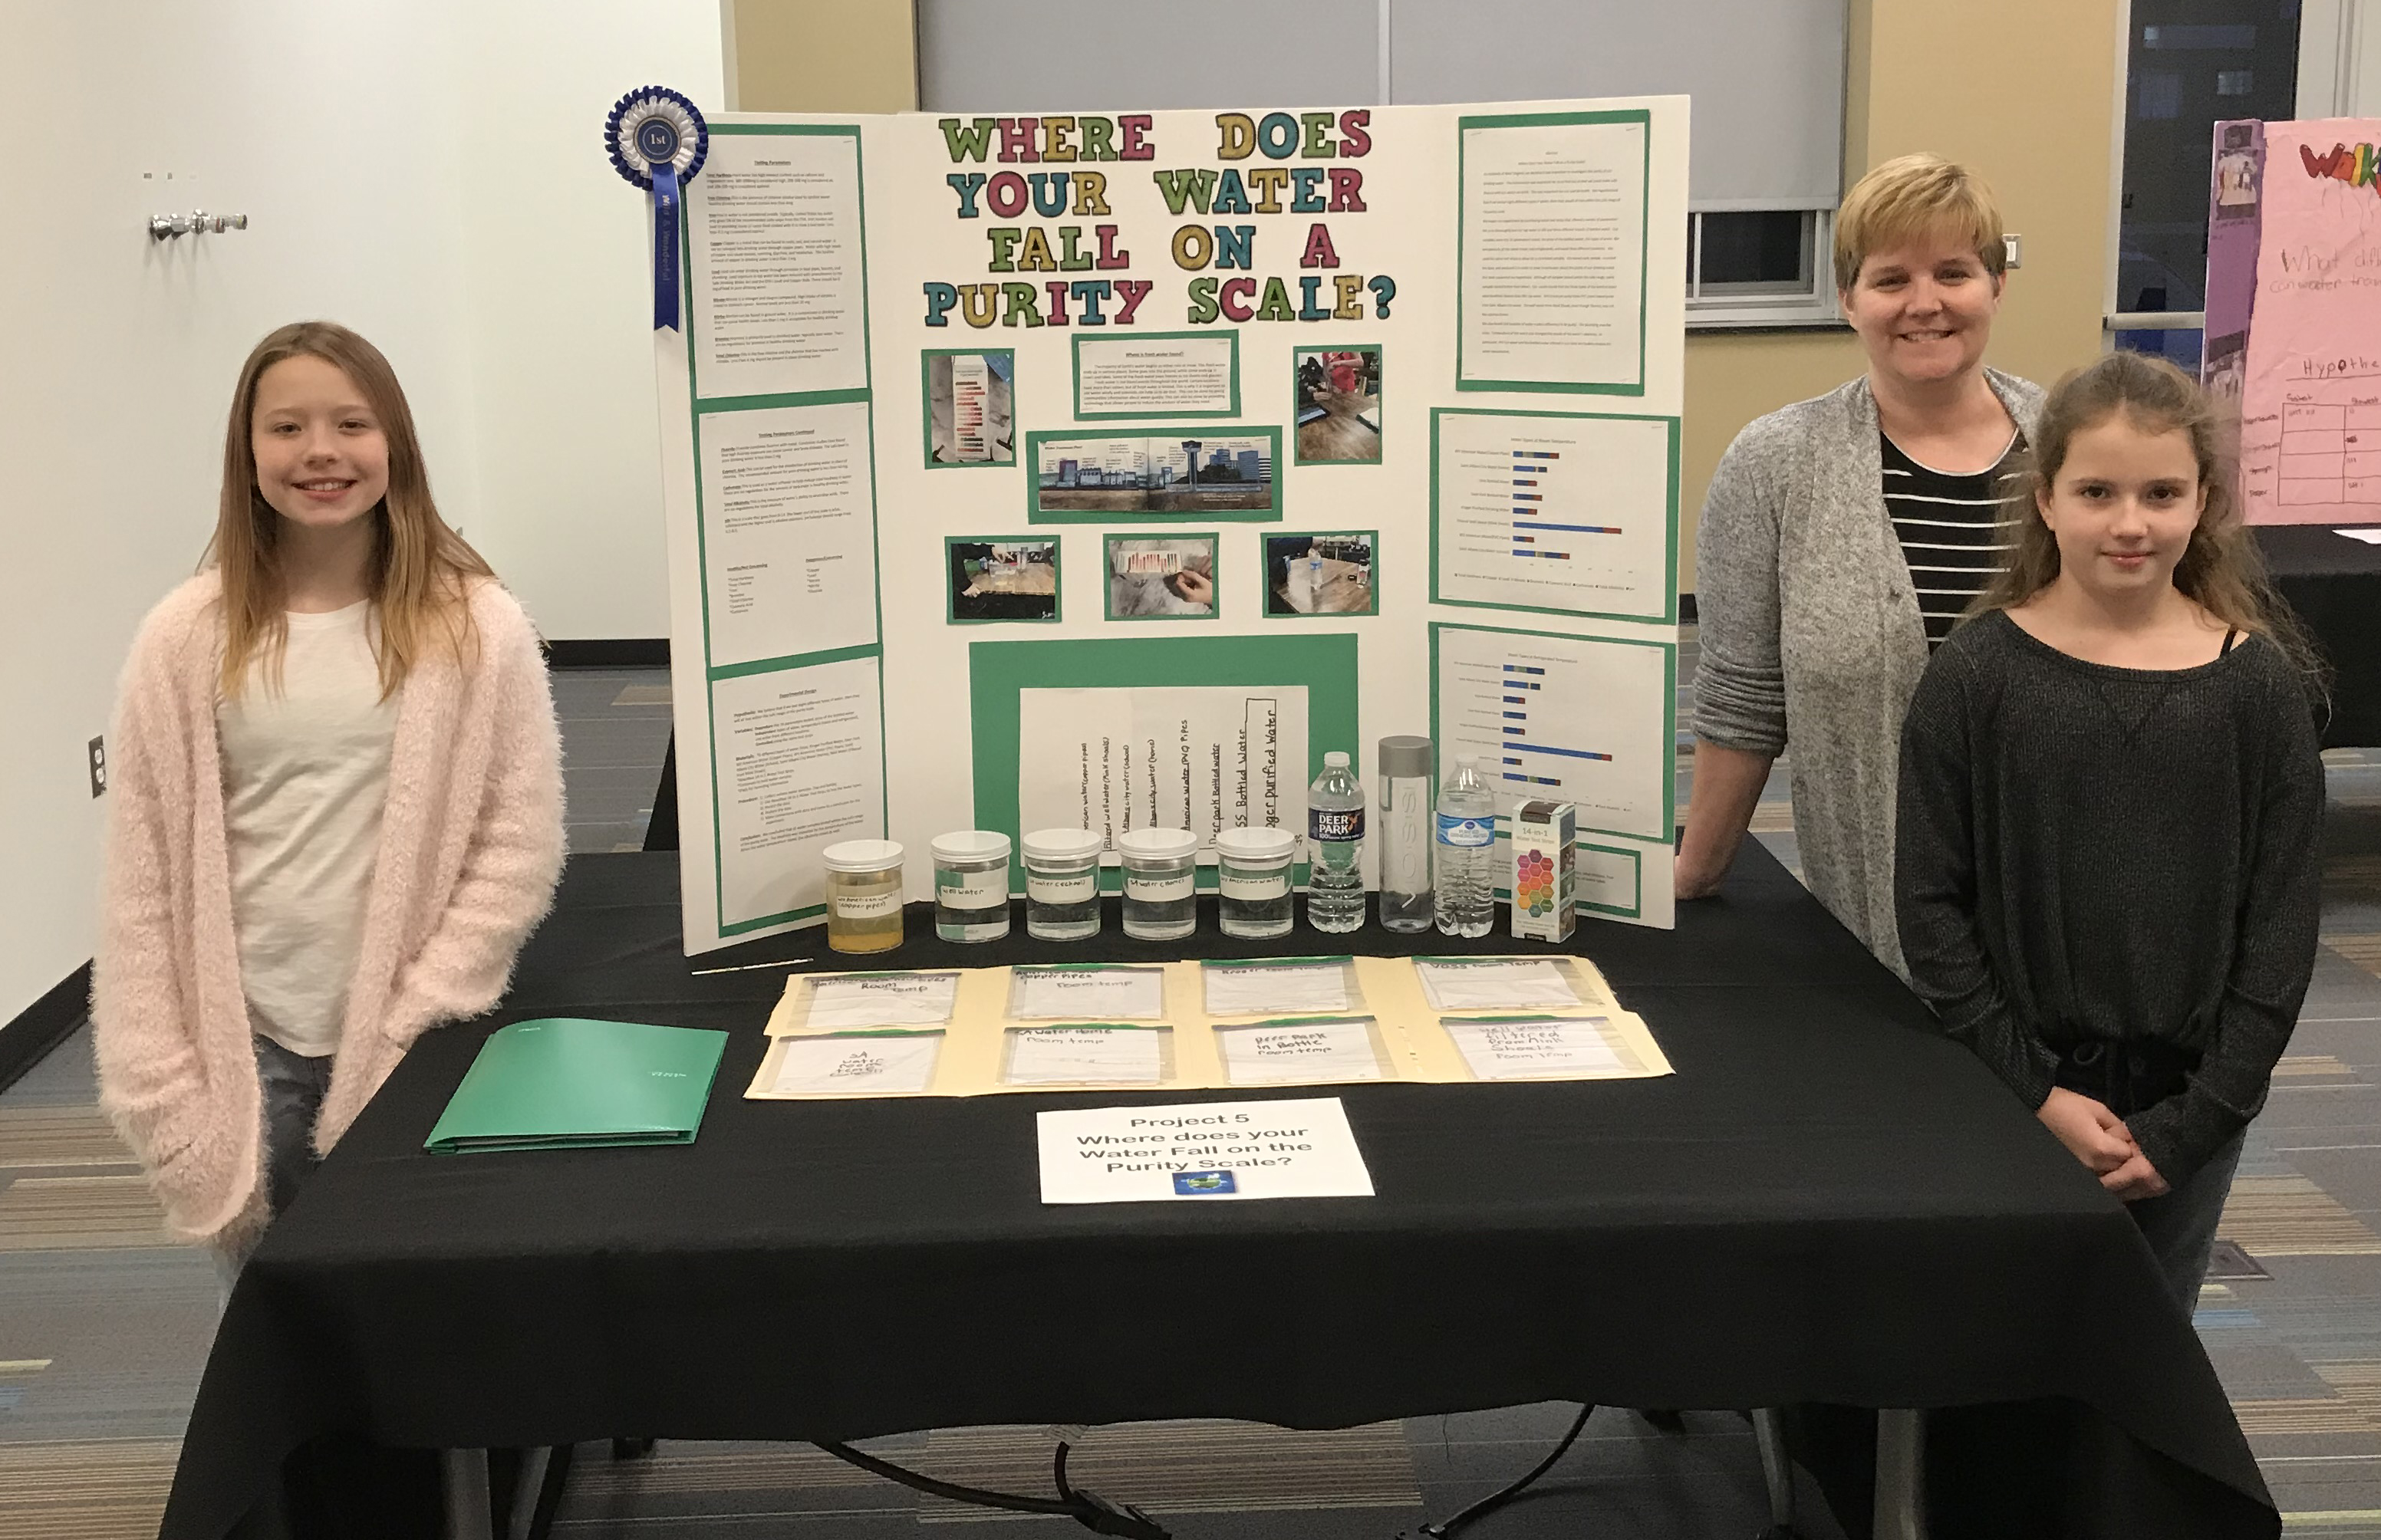 Students from Lakewood Elementary and teacher Jodi Ballard, pose with their project, 'Where Does Your Water Fall on a Purity Scale?'